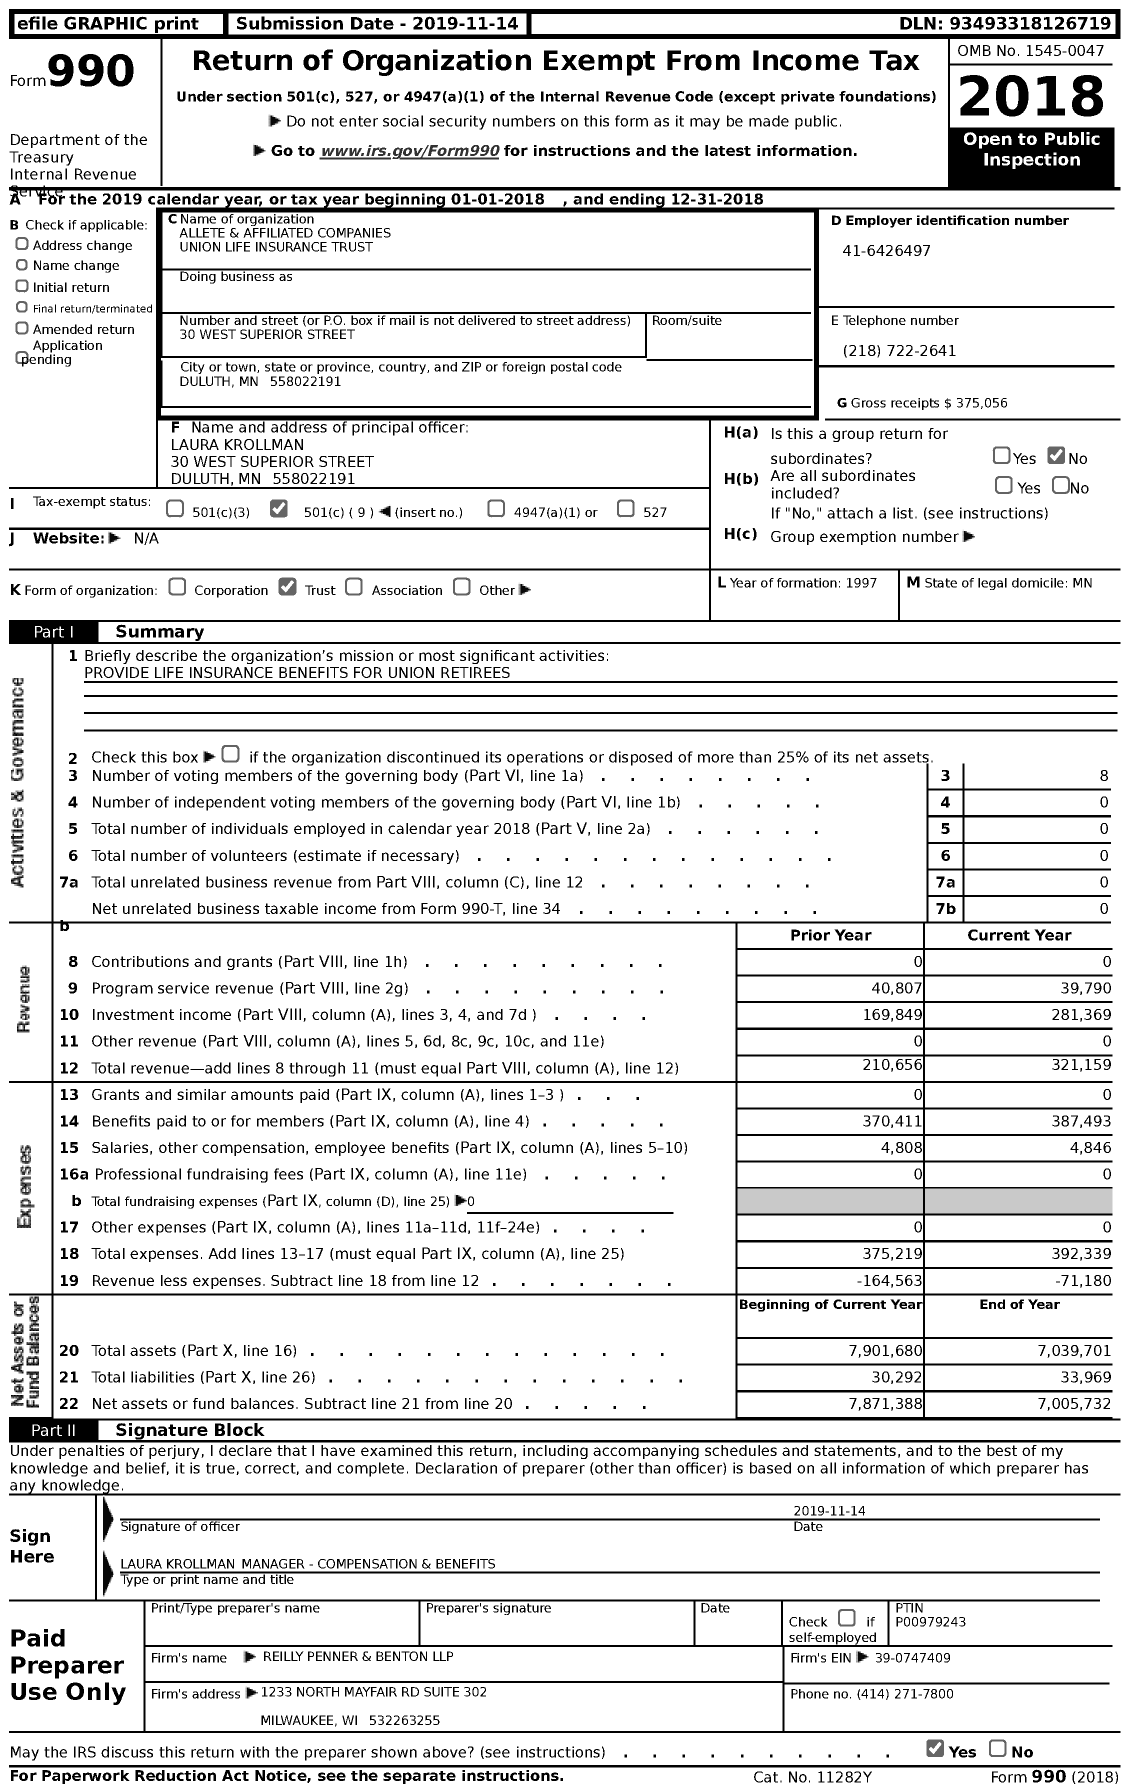 Image of first page of 2018 Form 990 for Allete and Affiliated Companies Union Life Insurance Trust